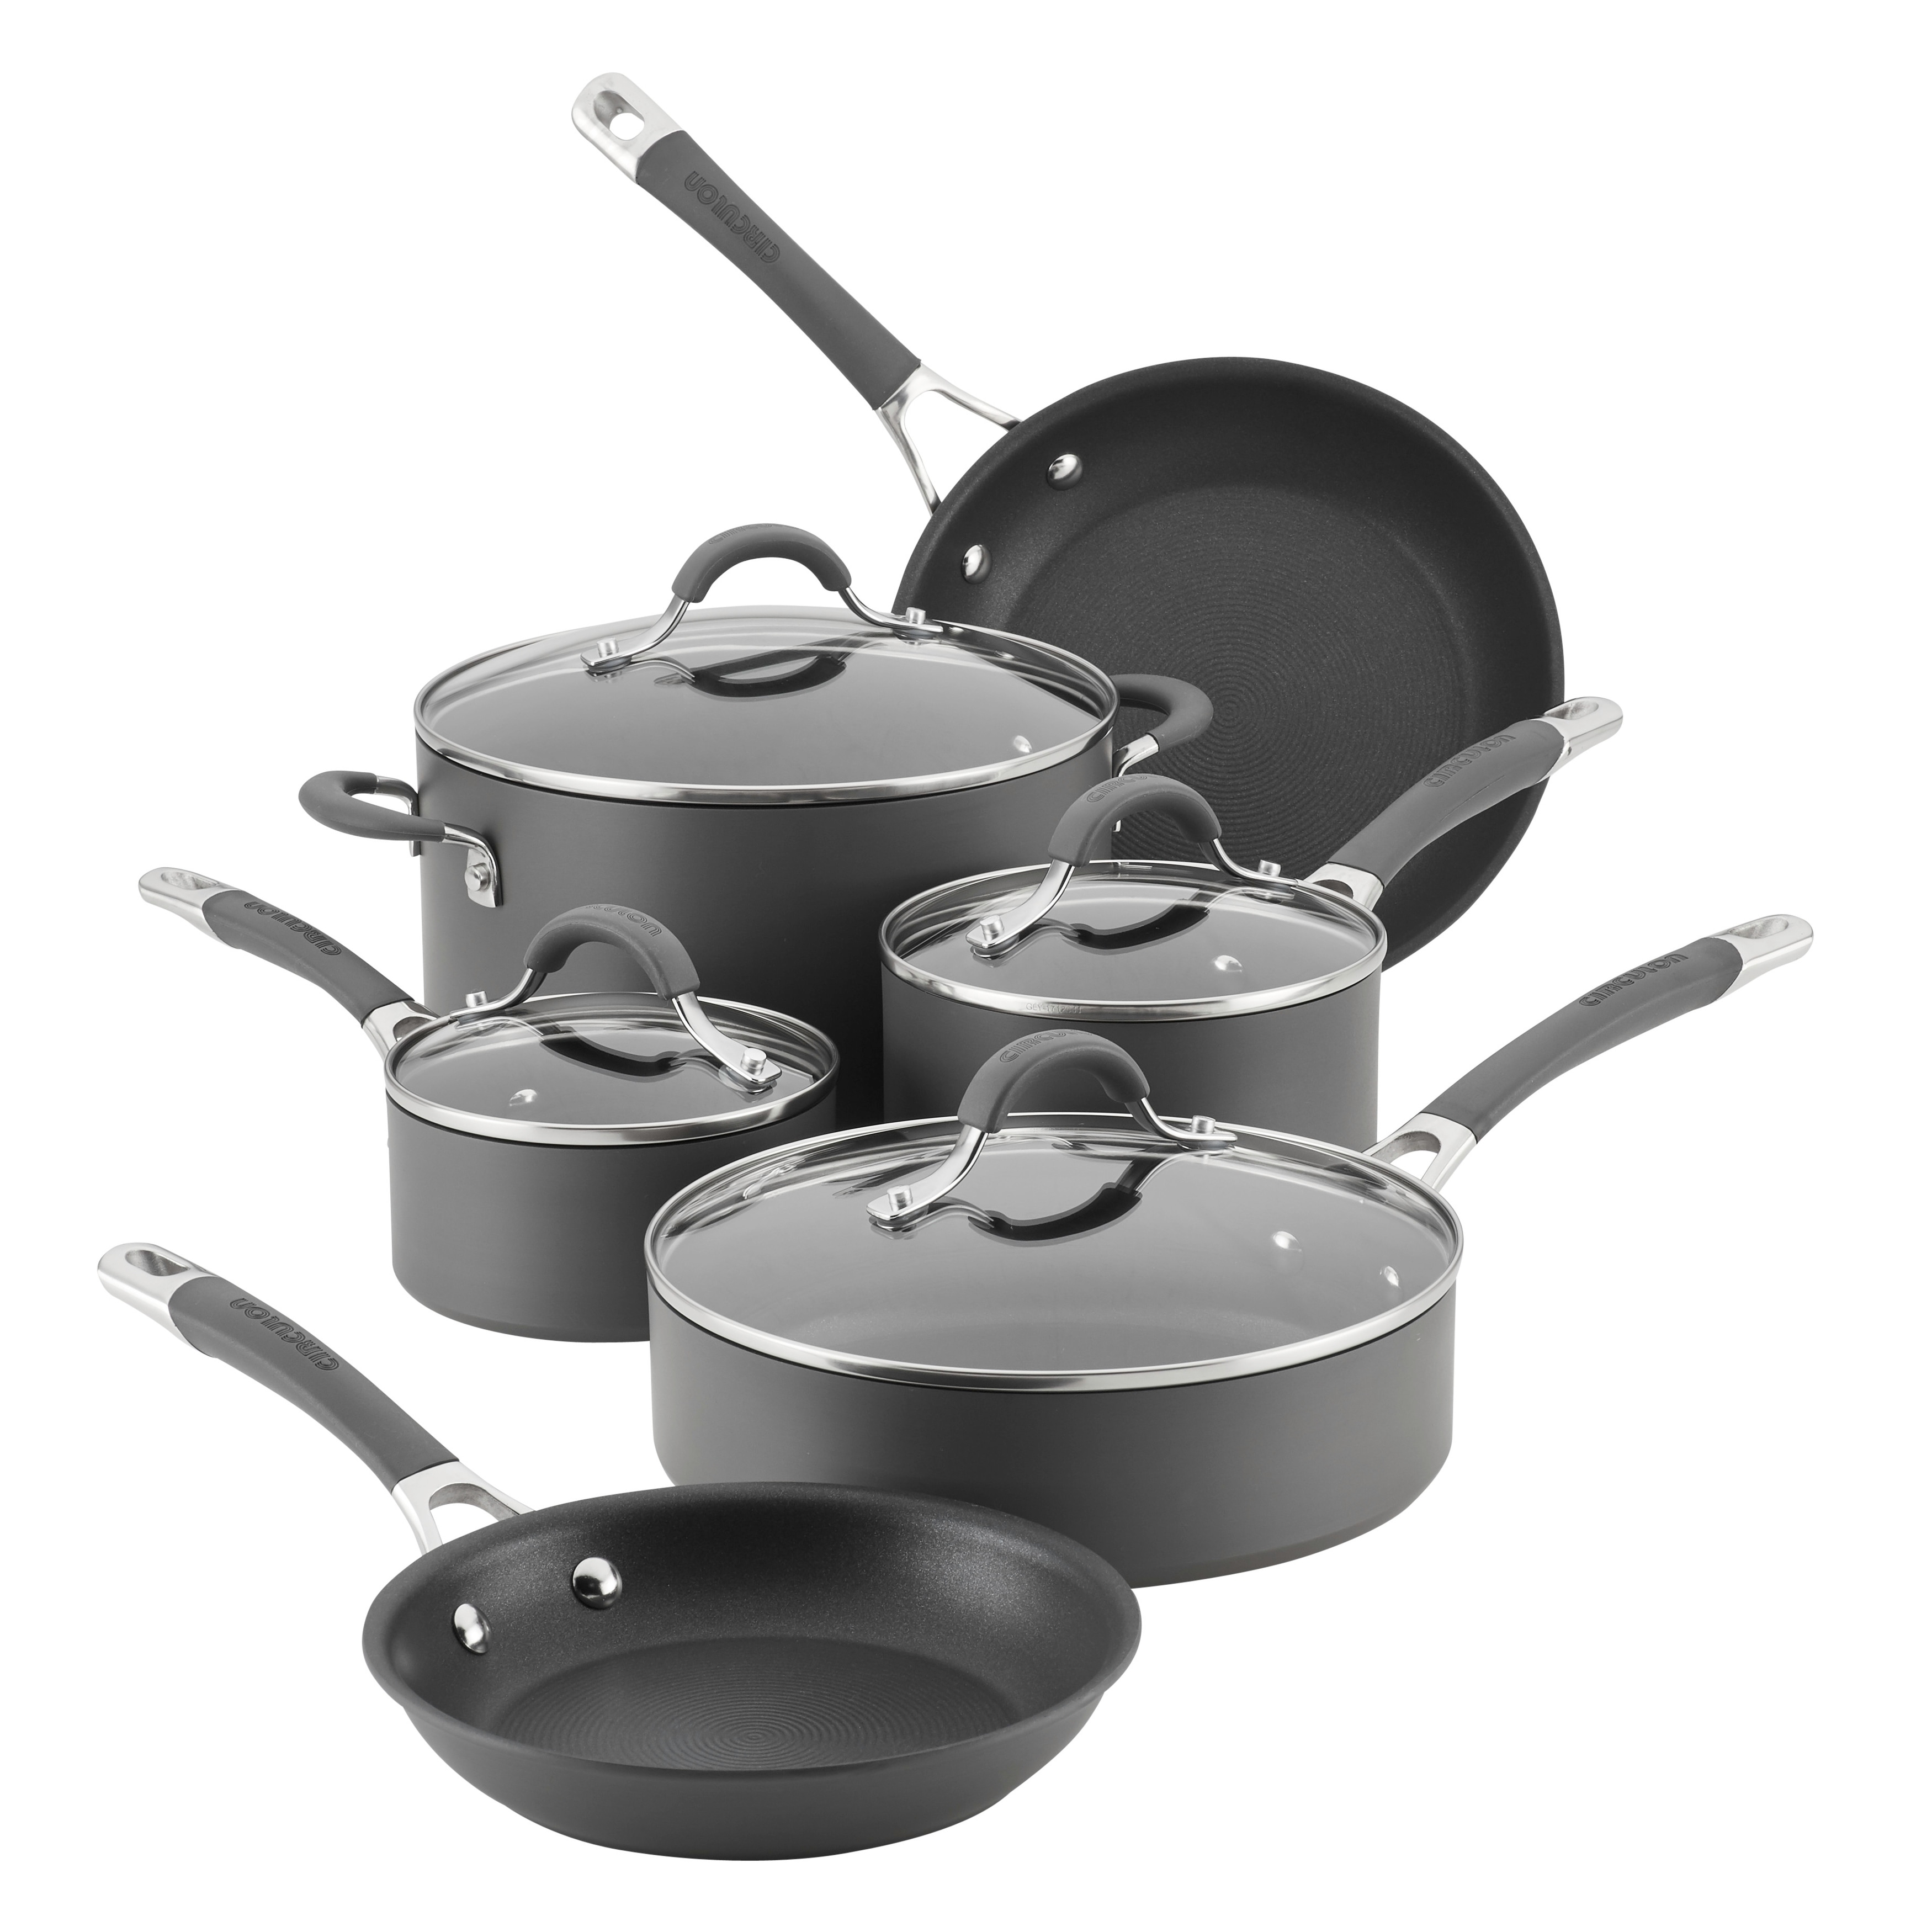 Hard Anodized Nonstick Cookware: The Ultimate Cooking Companion